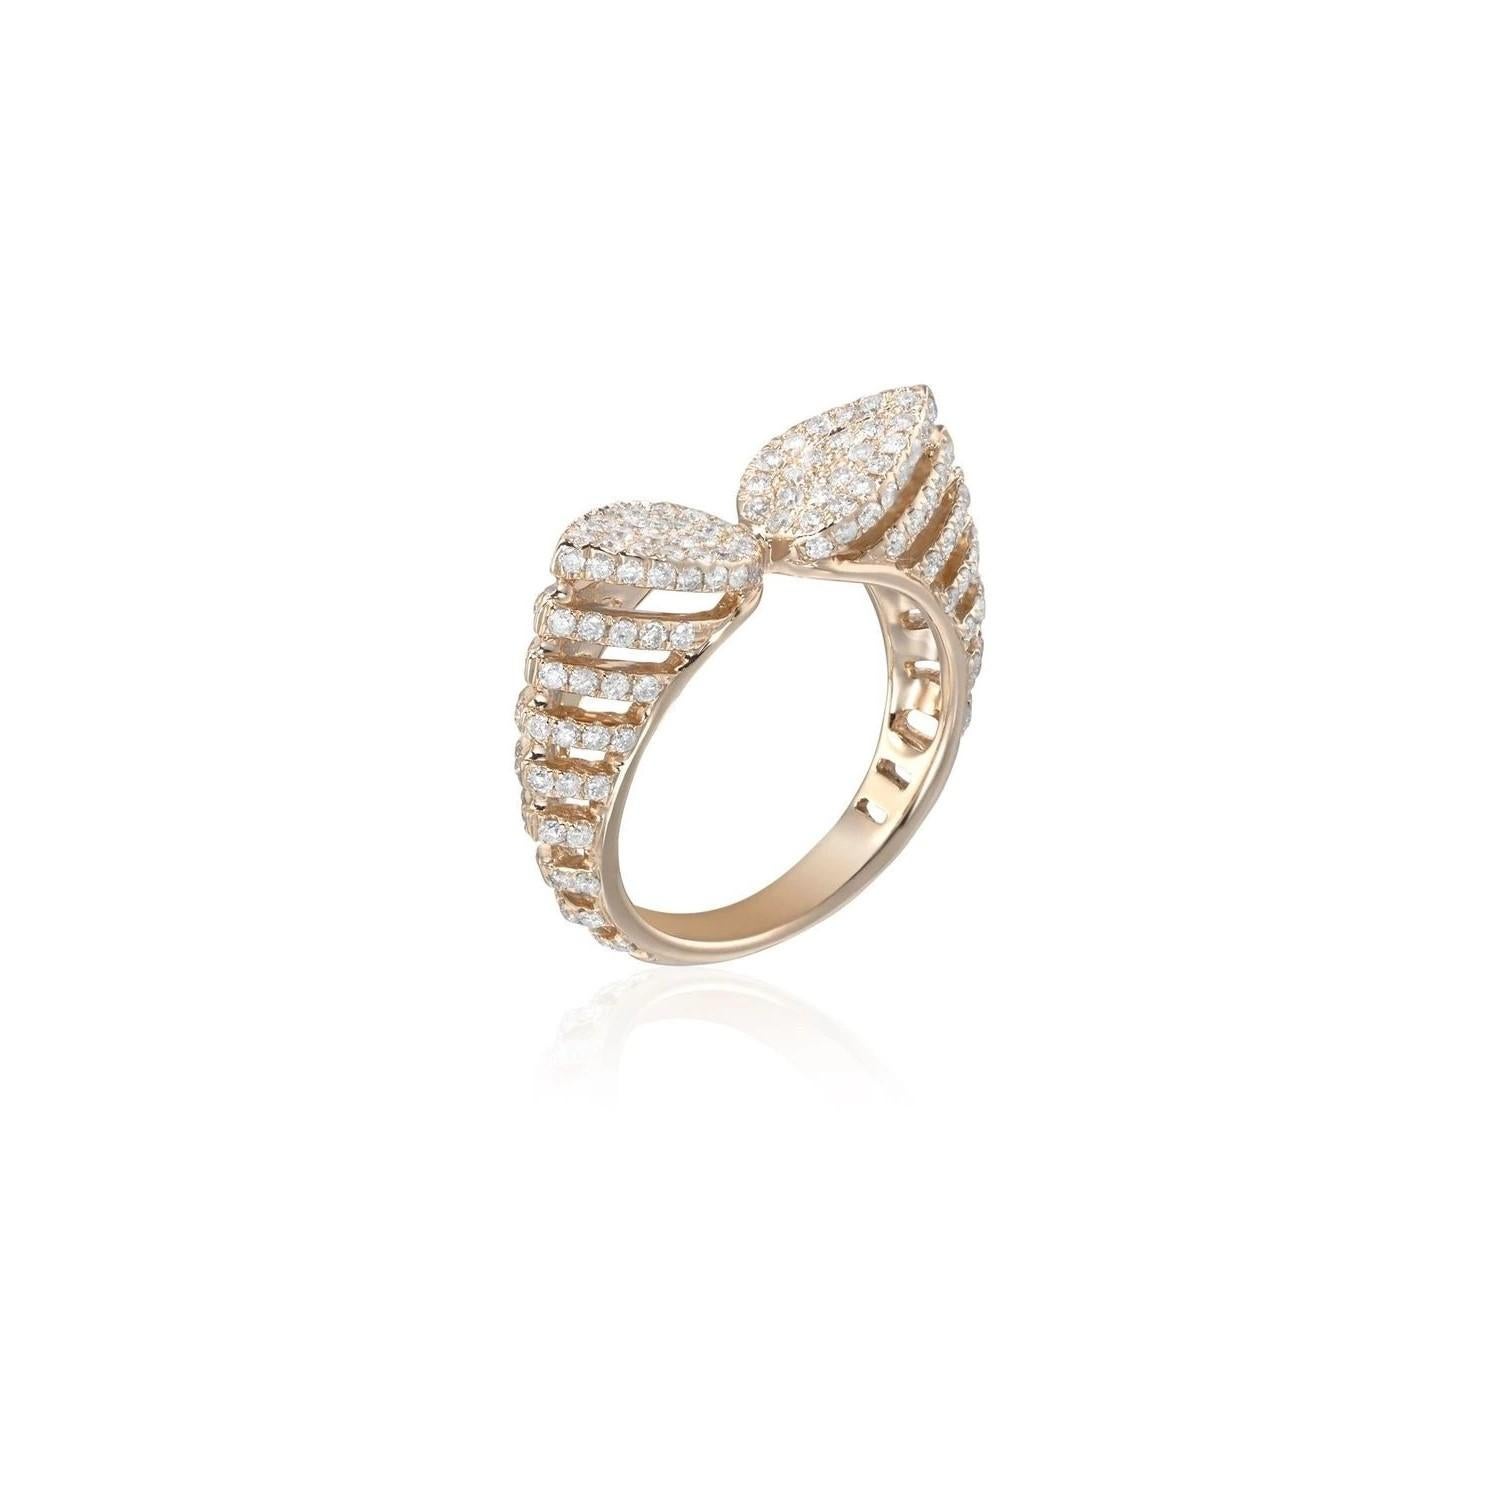 AS29
This statement 18kt rose gold Spine diamond pinky ring from AS29 is simply striking. 
Total Carat Weight: 0.7 cts.



